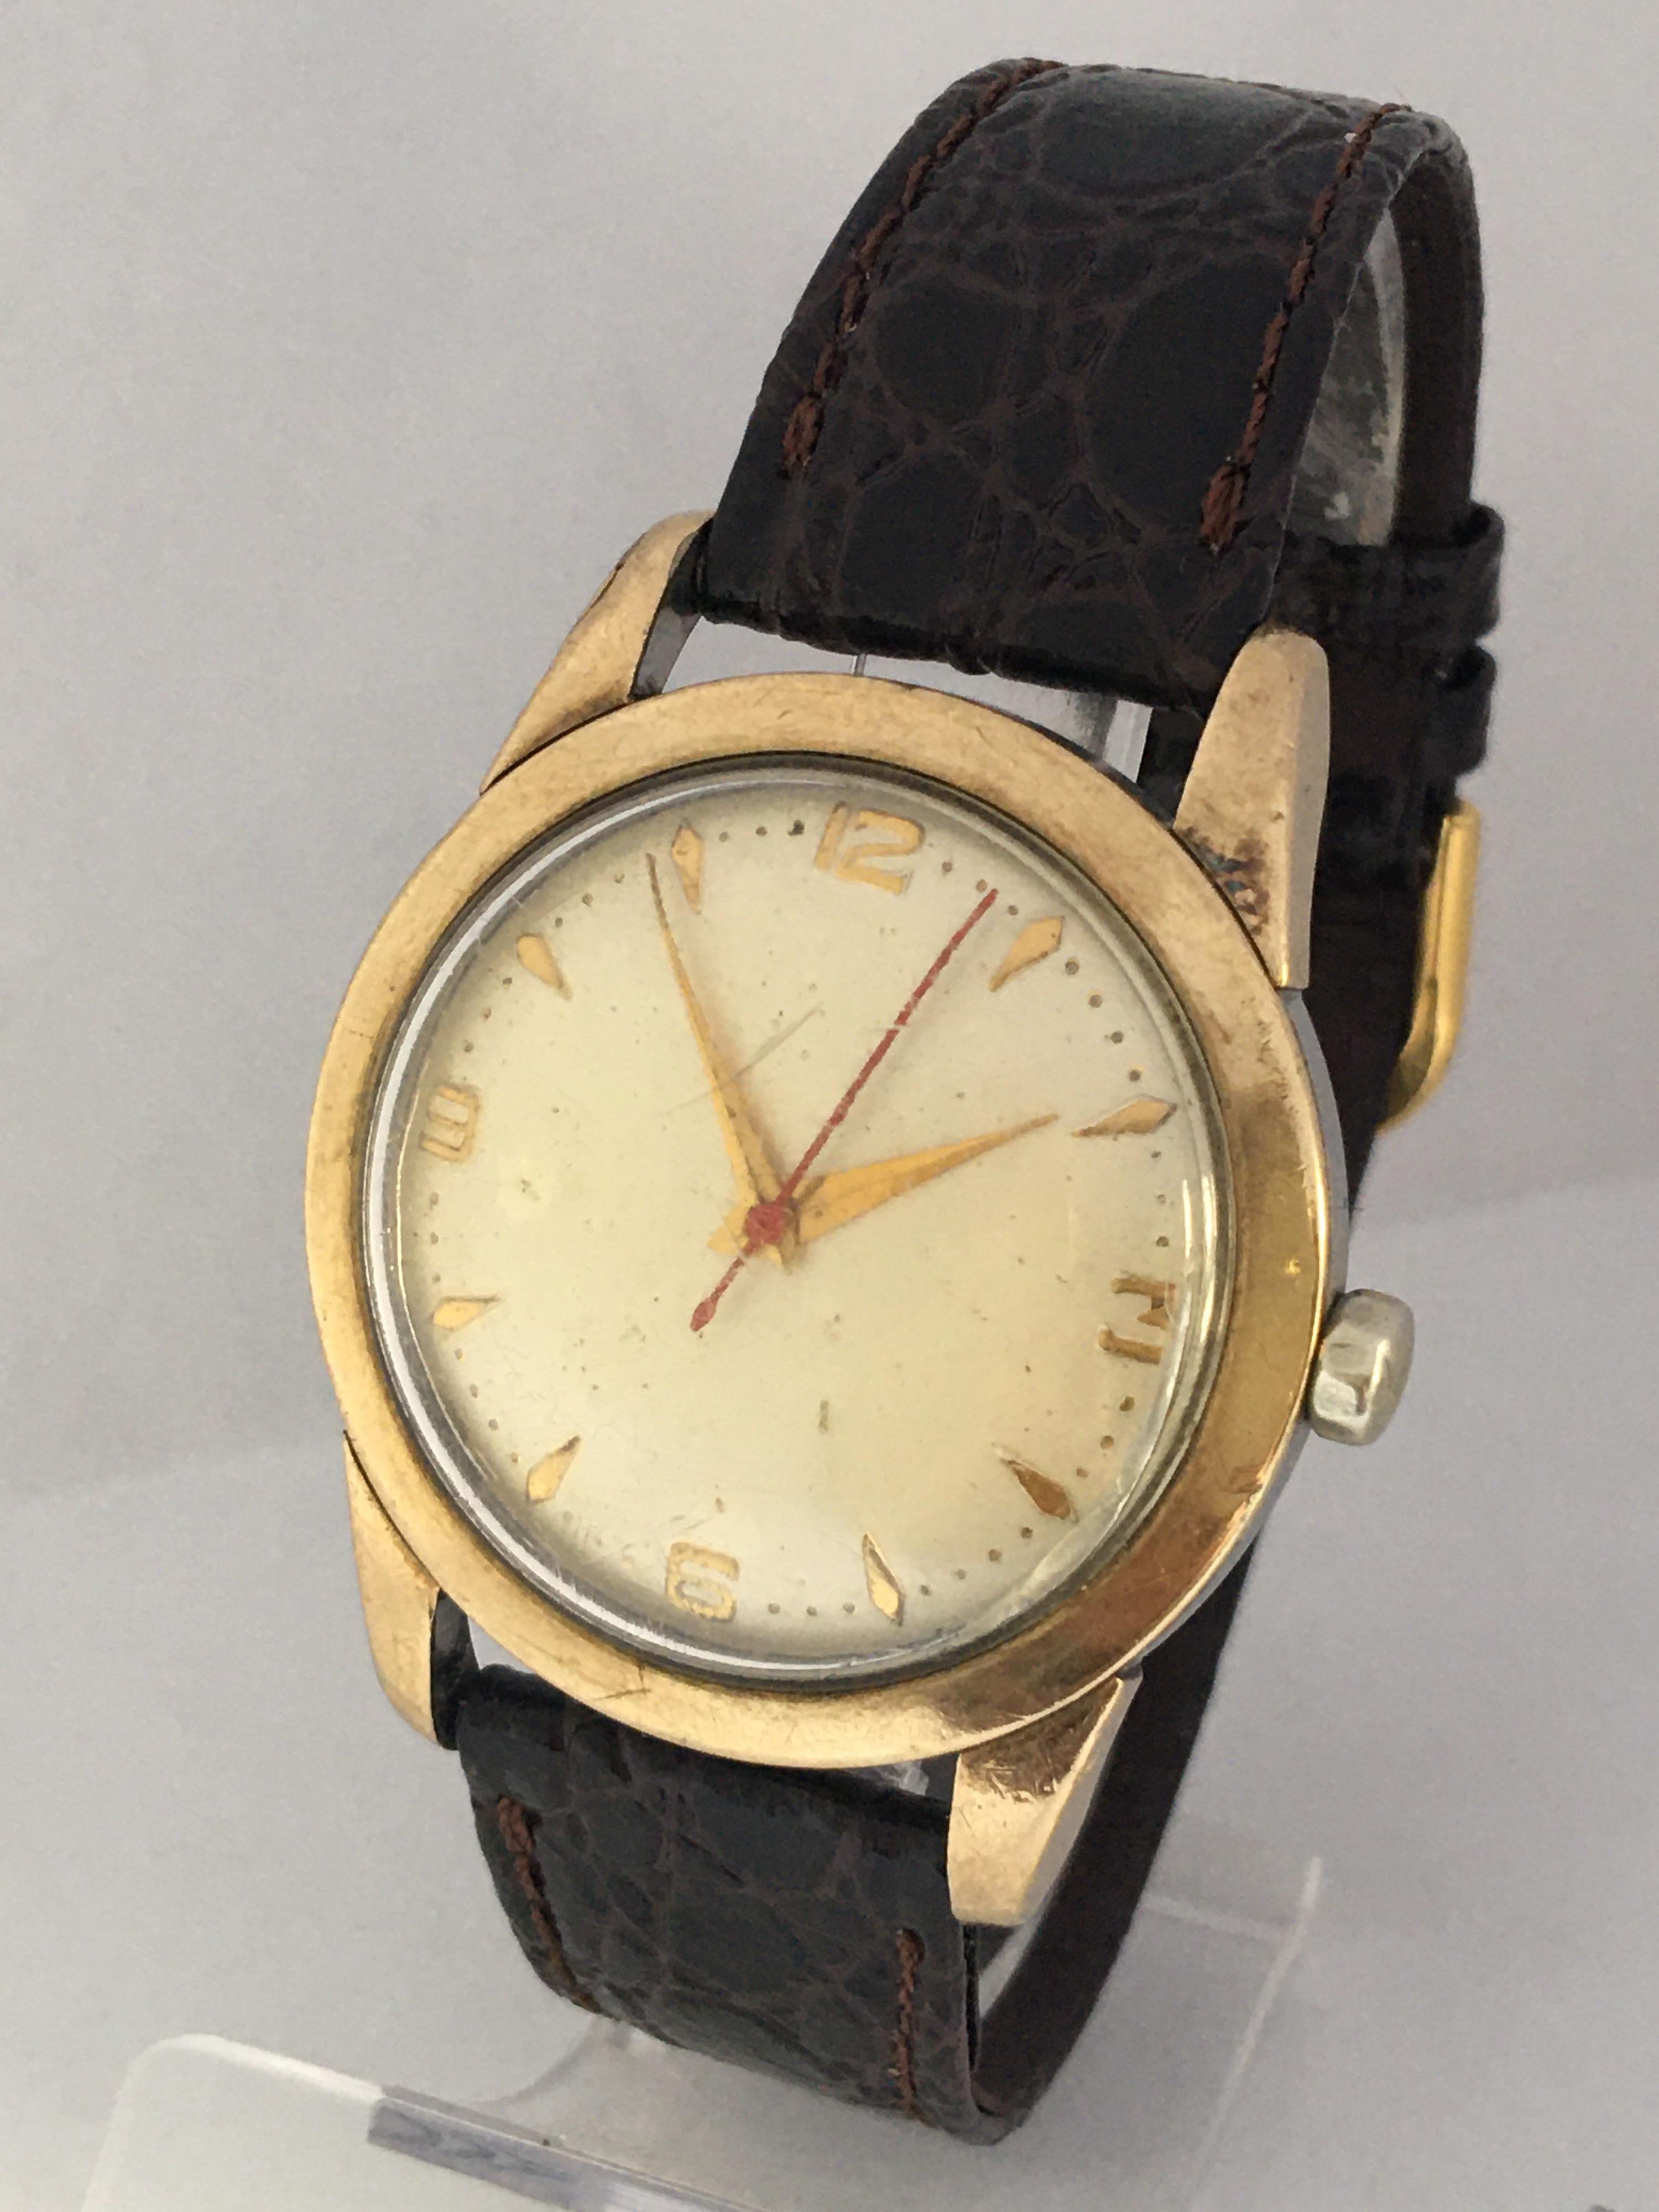 This pre-owned 35mm diameter vintage hand winding watch is in good working condition and it is running. Visible signs of ageing and wear with some cracks and scratches on the glass as shown. Some small scratches on the watch case as shown. 

Please